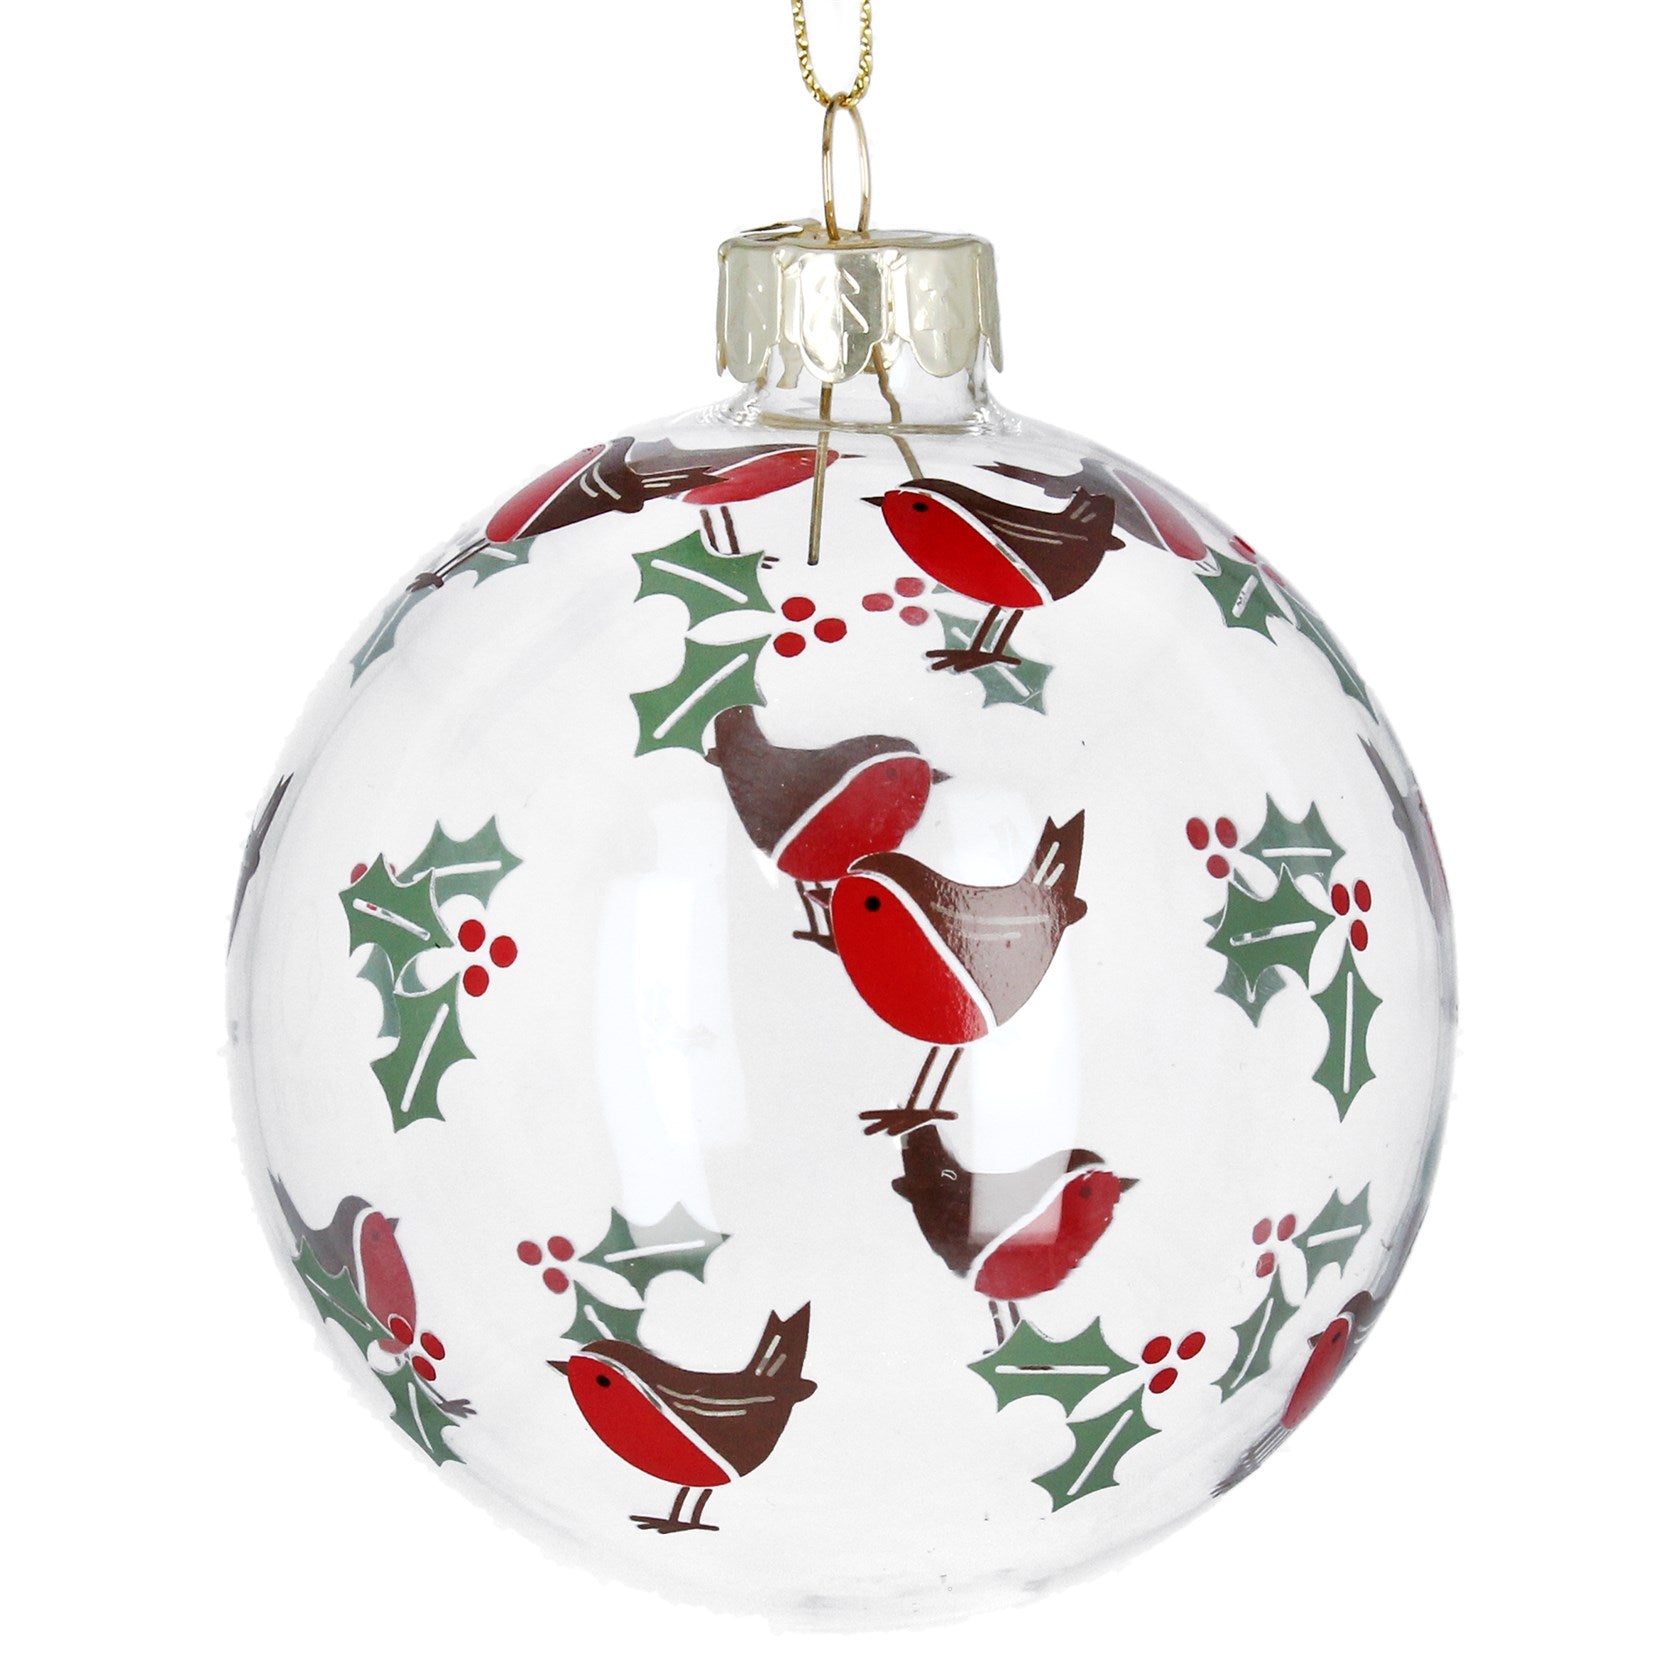 Clear glass robins/holly bauble